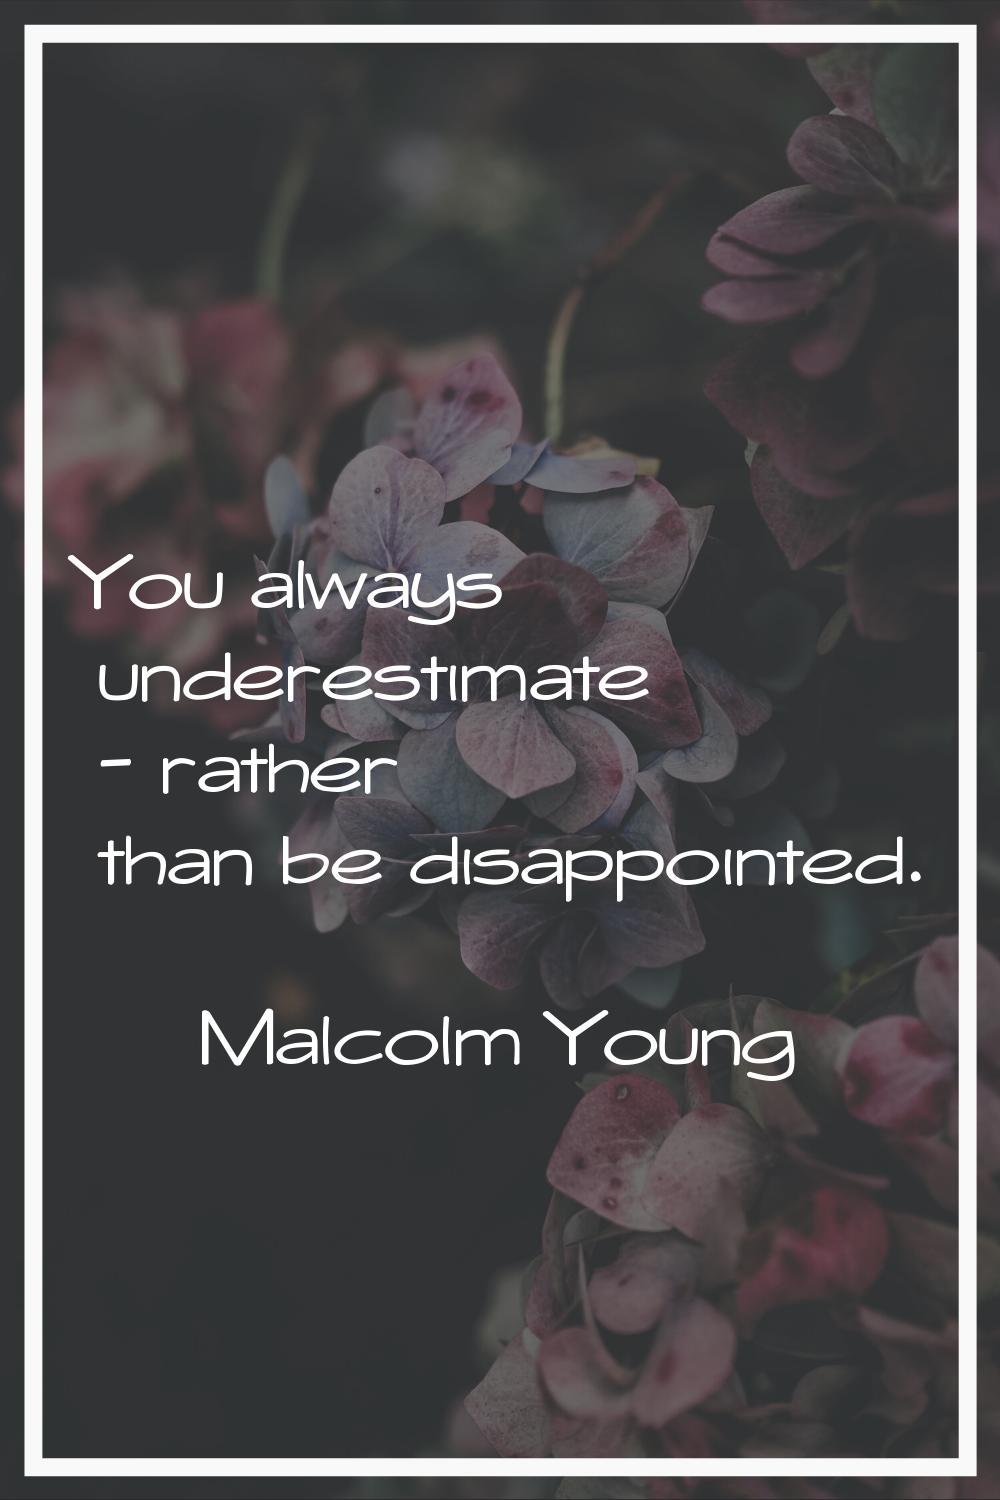 You always underestimate - rather than be disappointed.